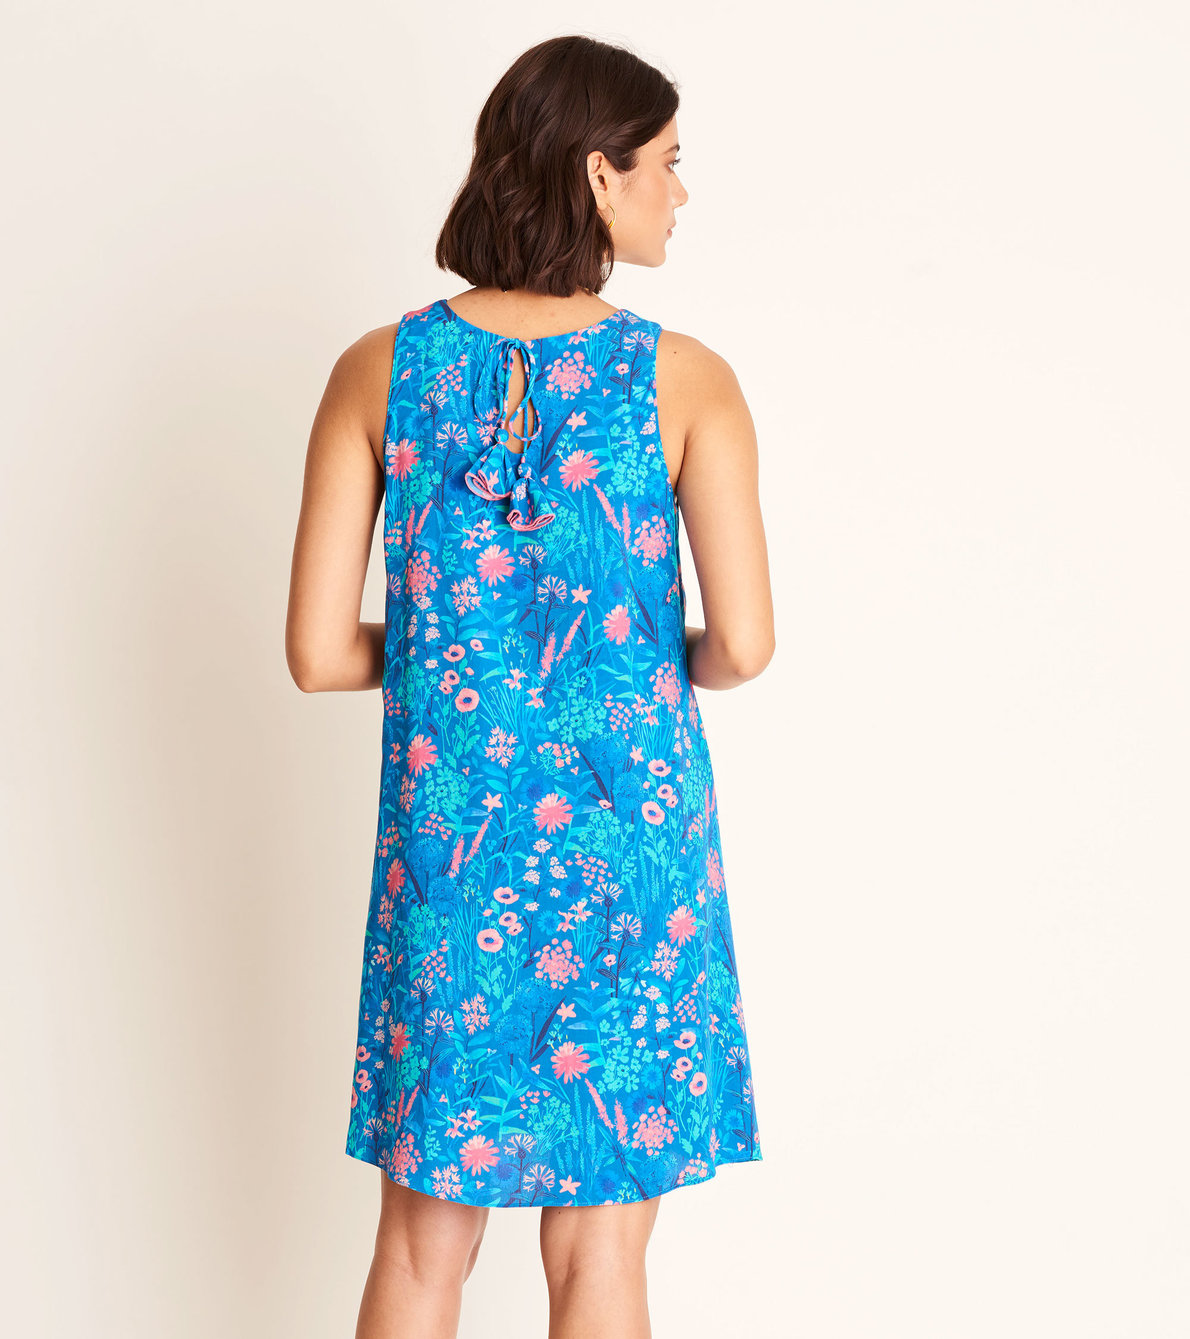 View larger image of Meghan Dress - Blue Wild Flowers